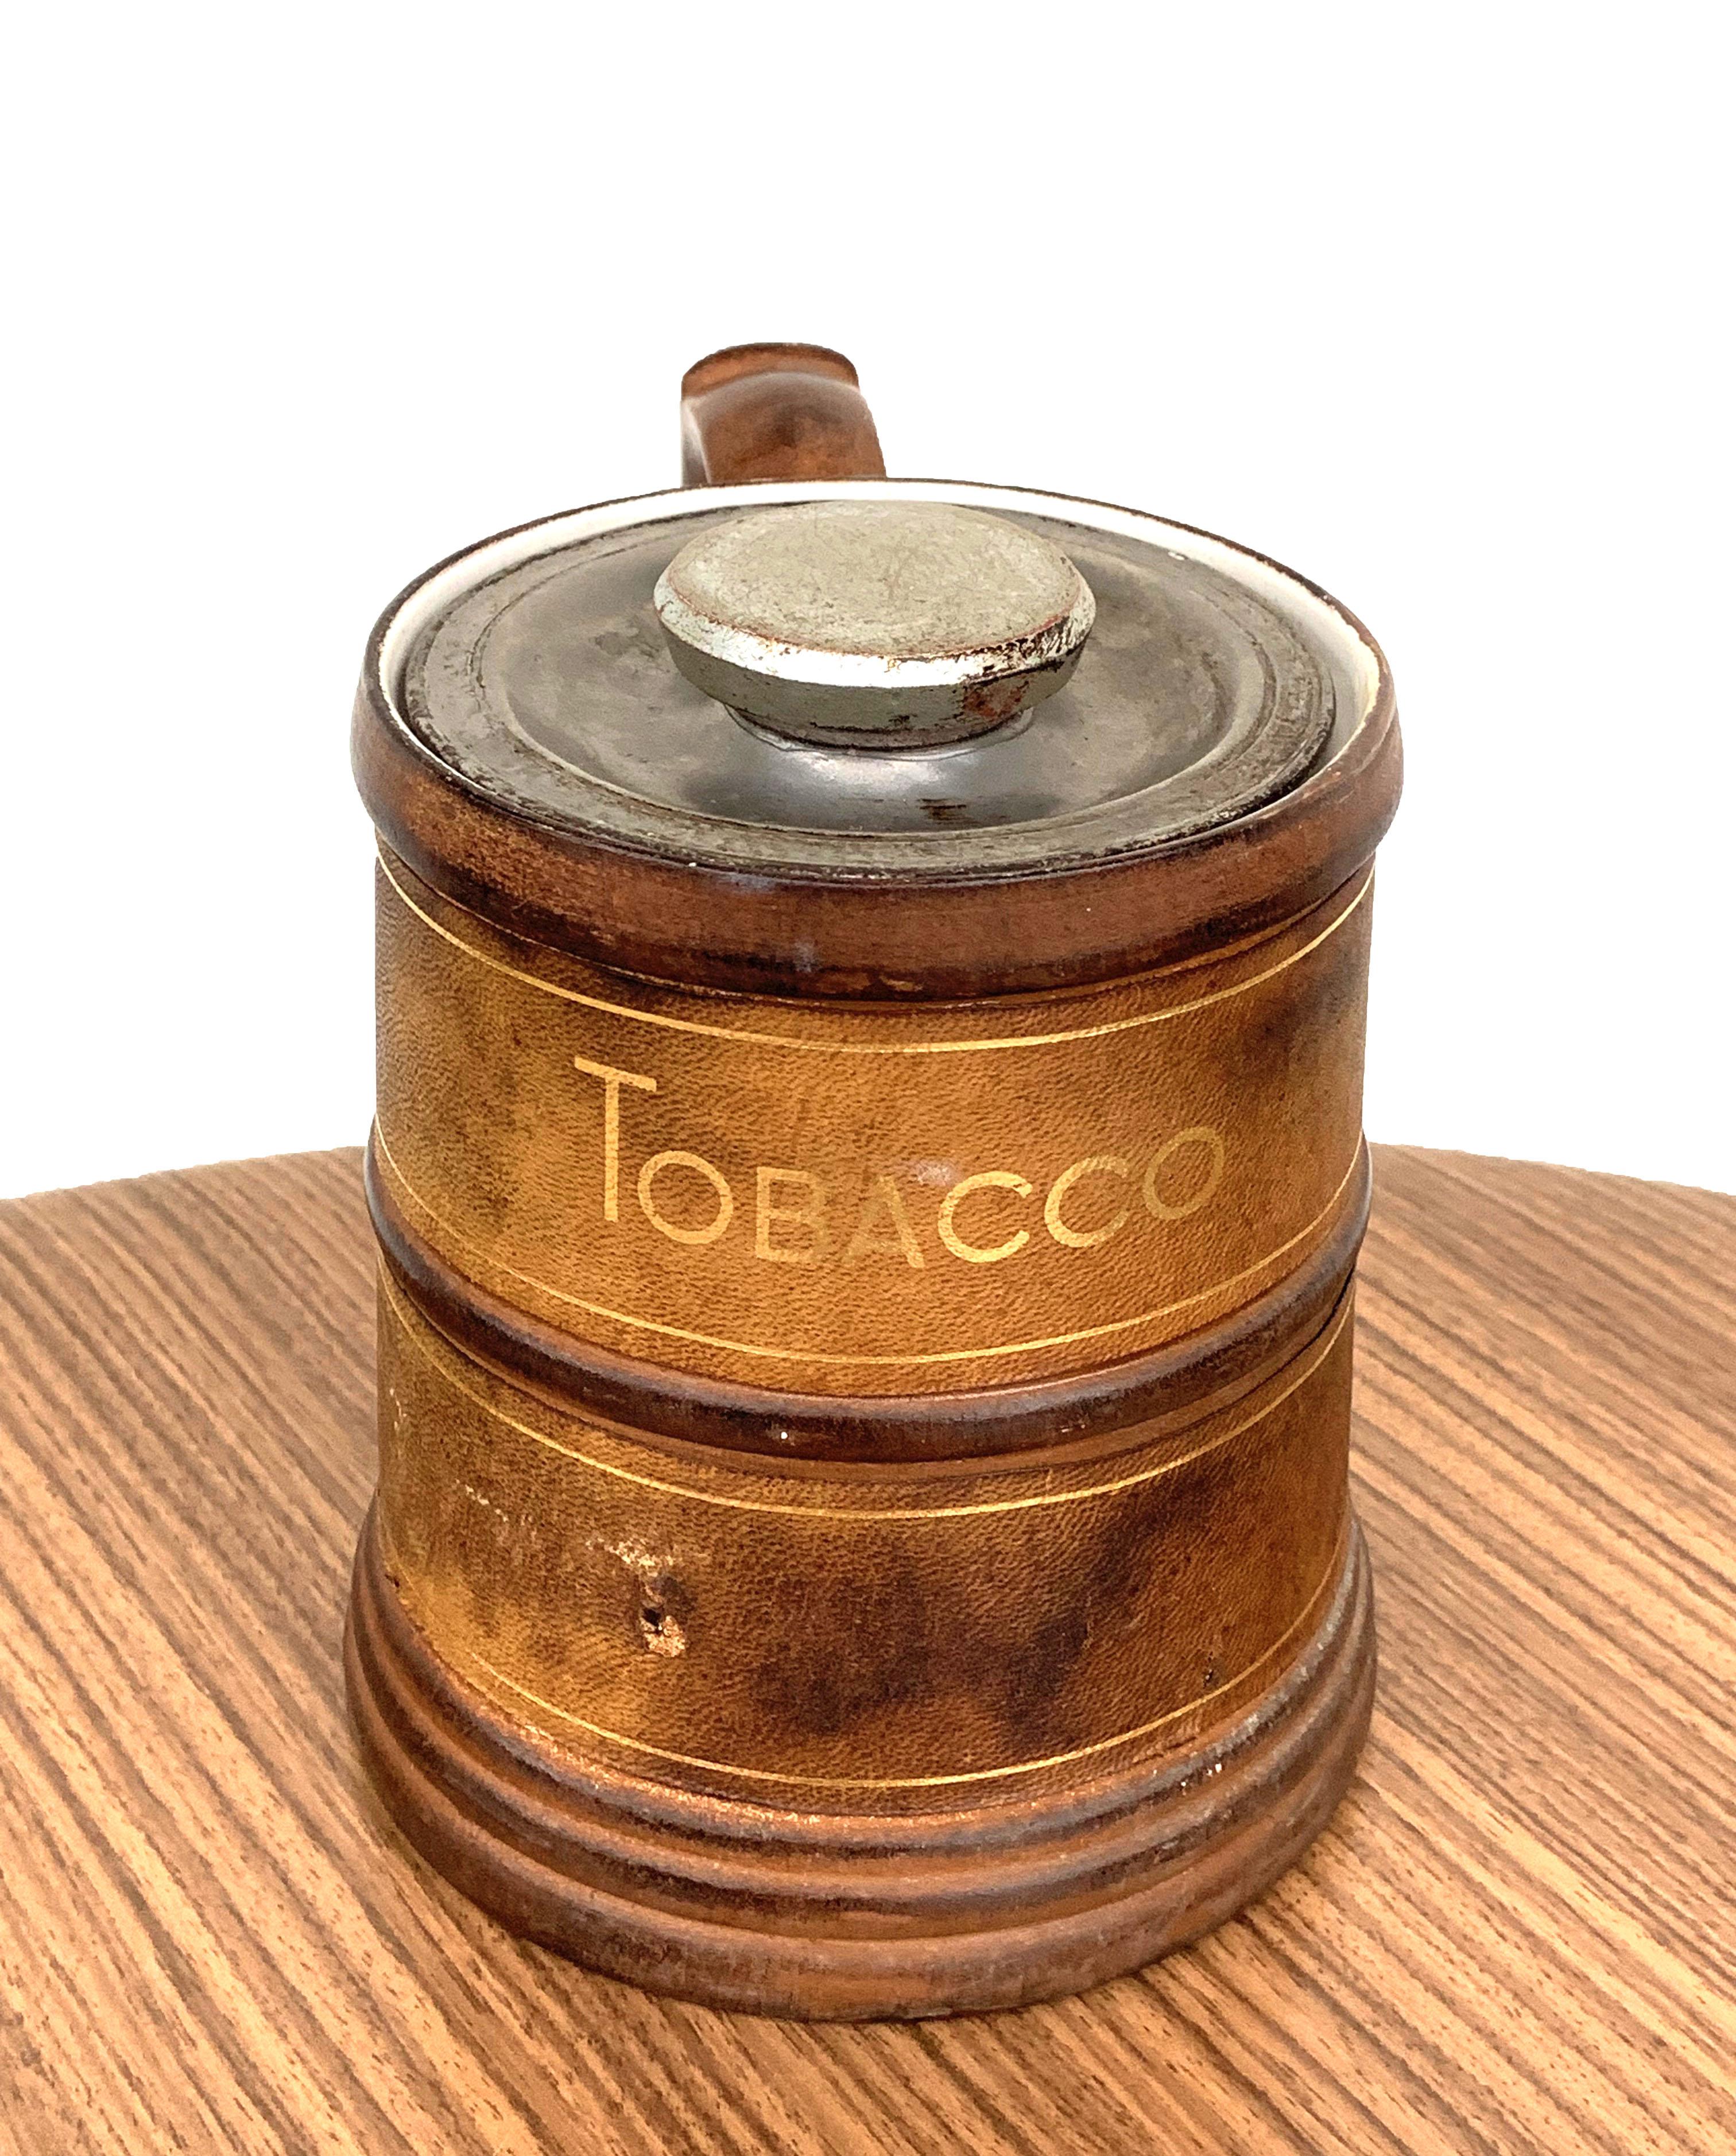 Midcentury Leather and Porcelain Ceramic Tobacco Pot with Gold Finishes, 1950s In Good Condition For Sale In Roma, IT